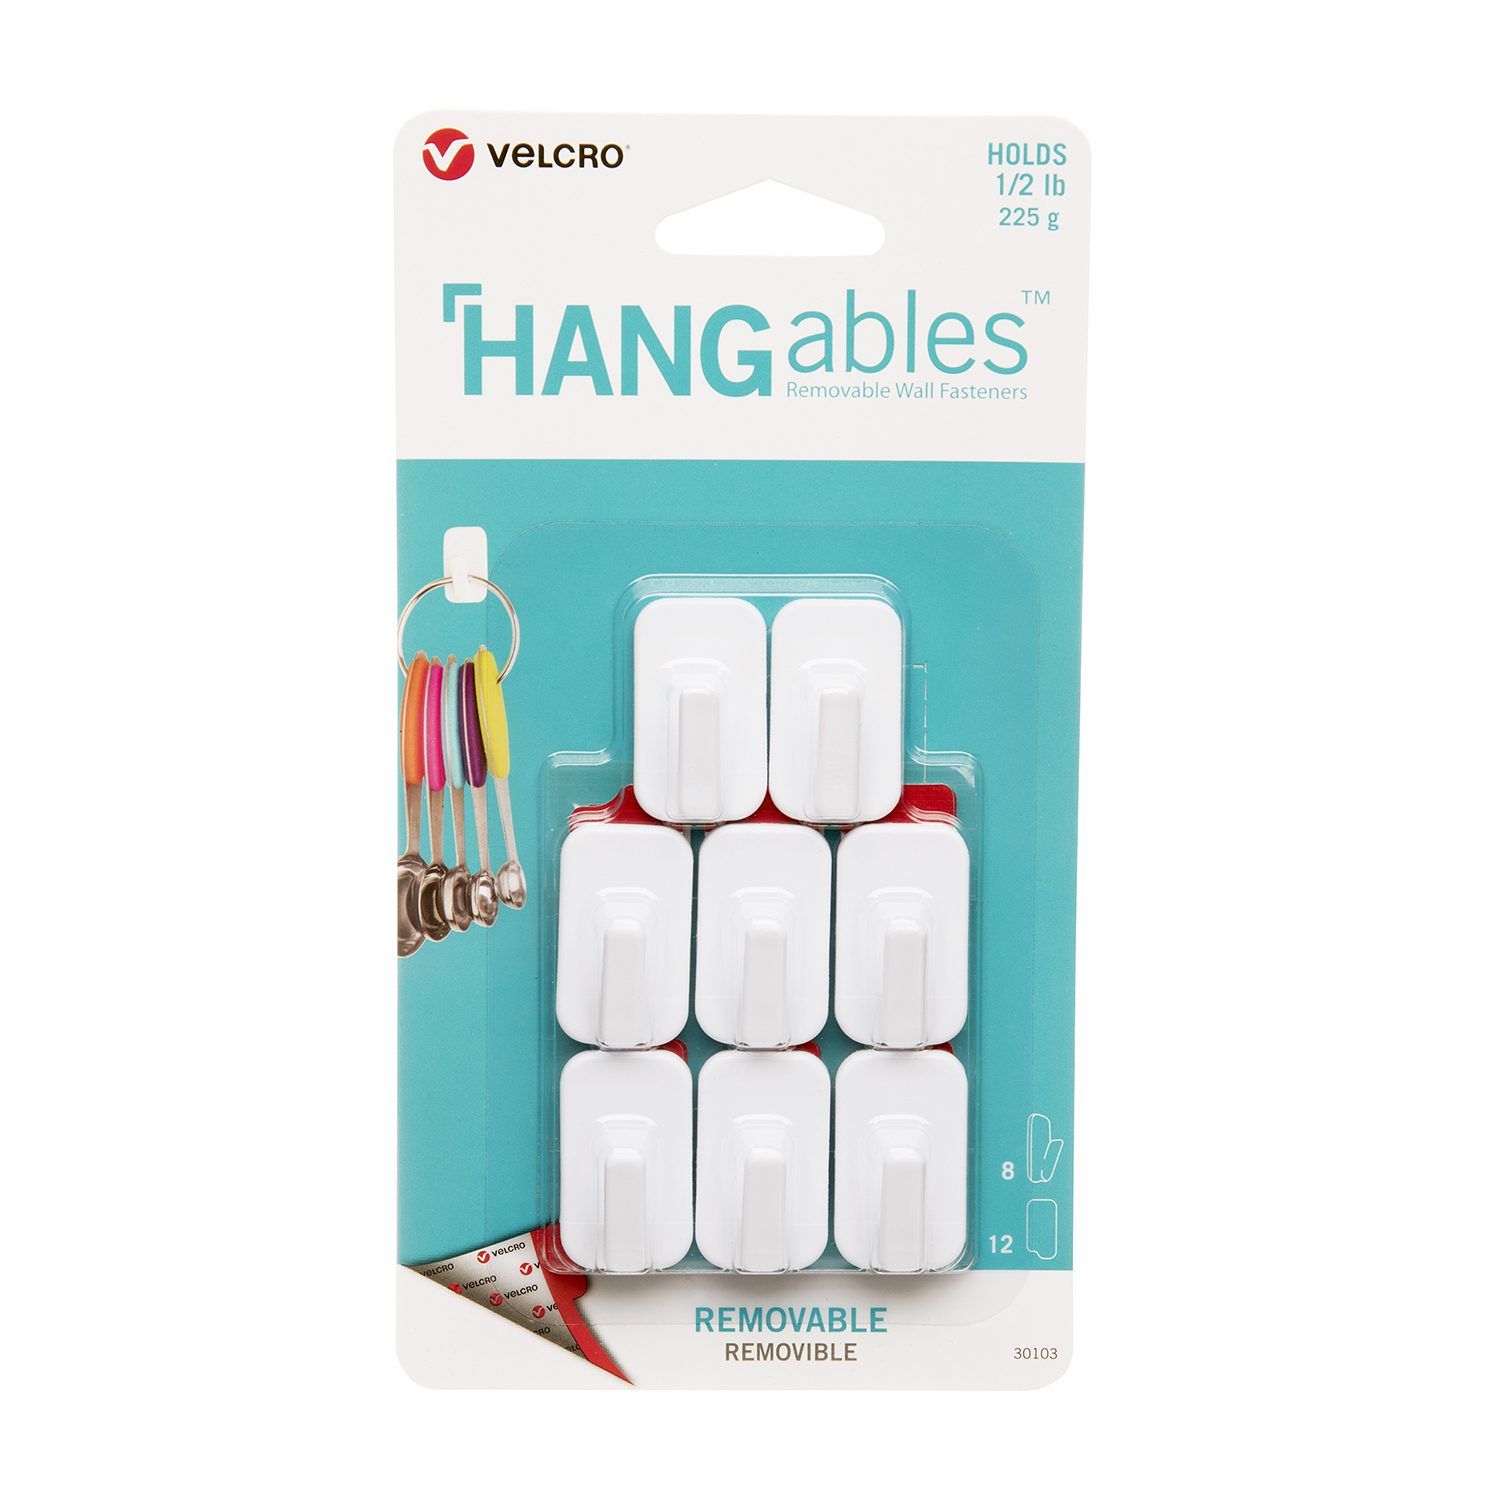 Gallery Wall Tips & Tricks with VELCRO® Brand HANGables® Wall Fasteners